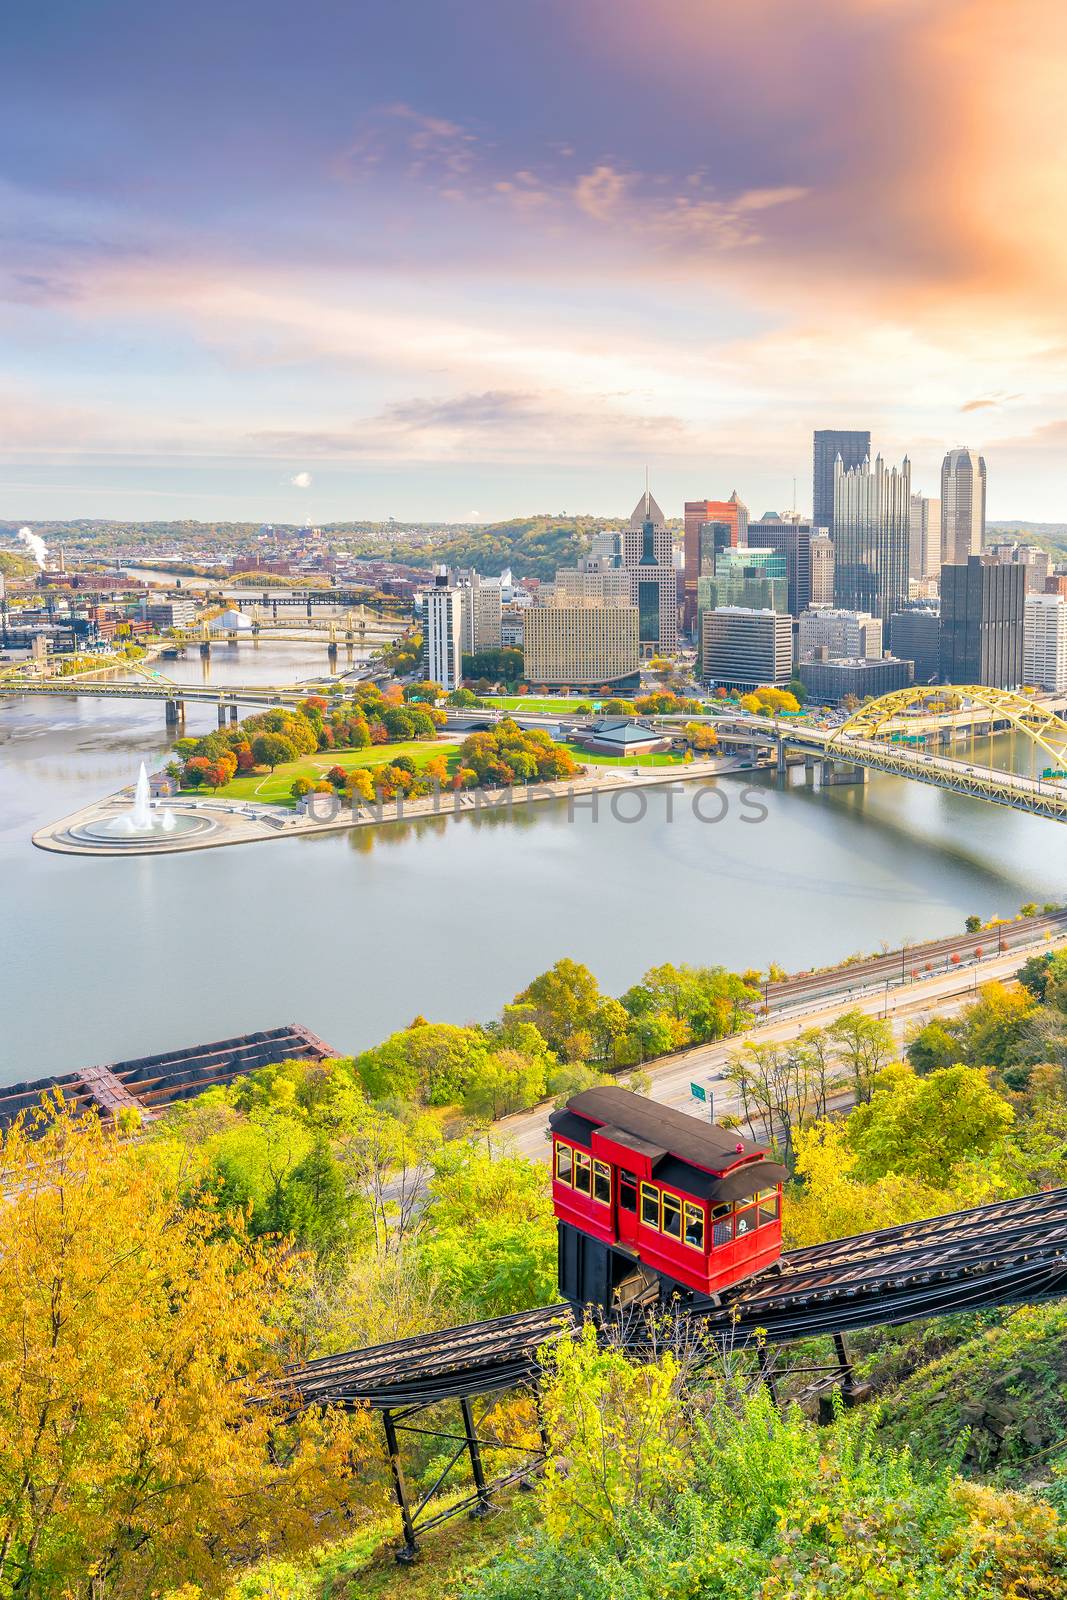 Downtown skyline of Pittsburgh, Pennsylvania at sunset by f11photo